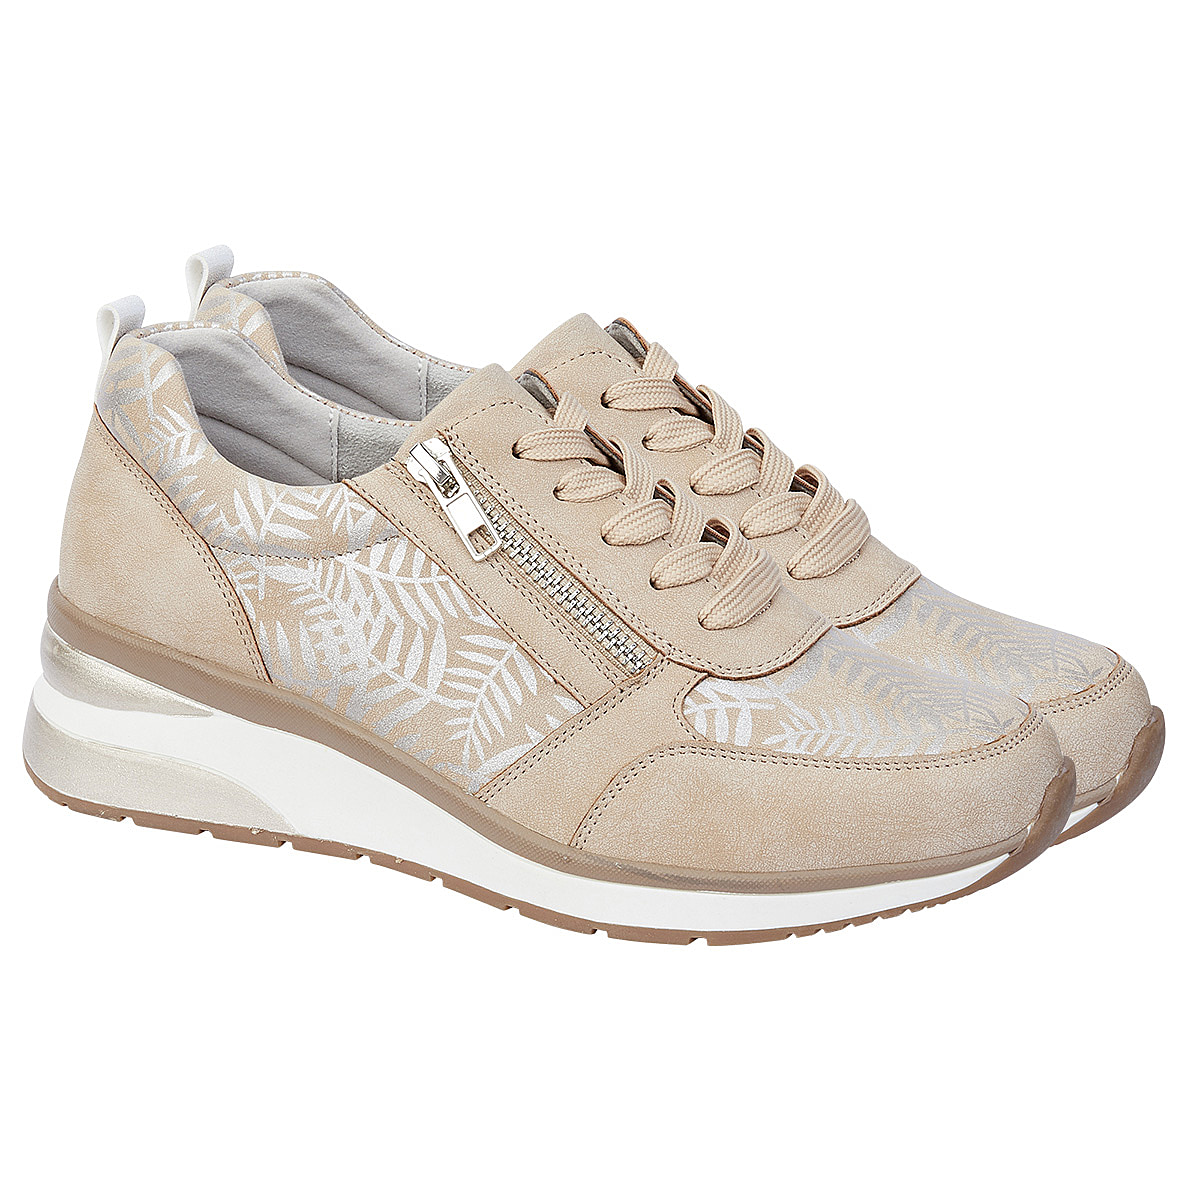 Lace Up Zip Fastening TROPICAL Ladies Shoes (Size 4) - Beige